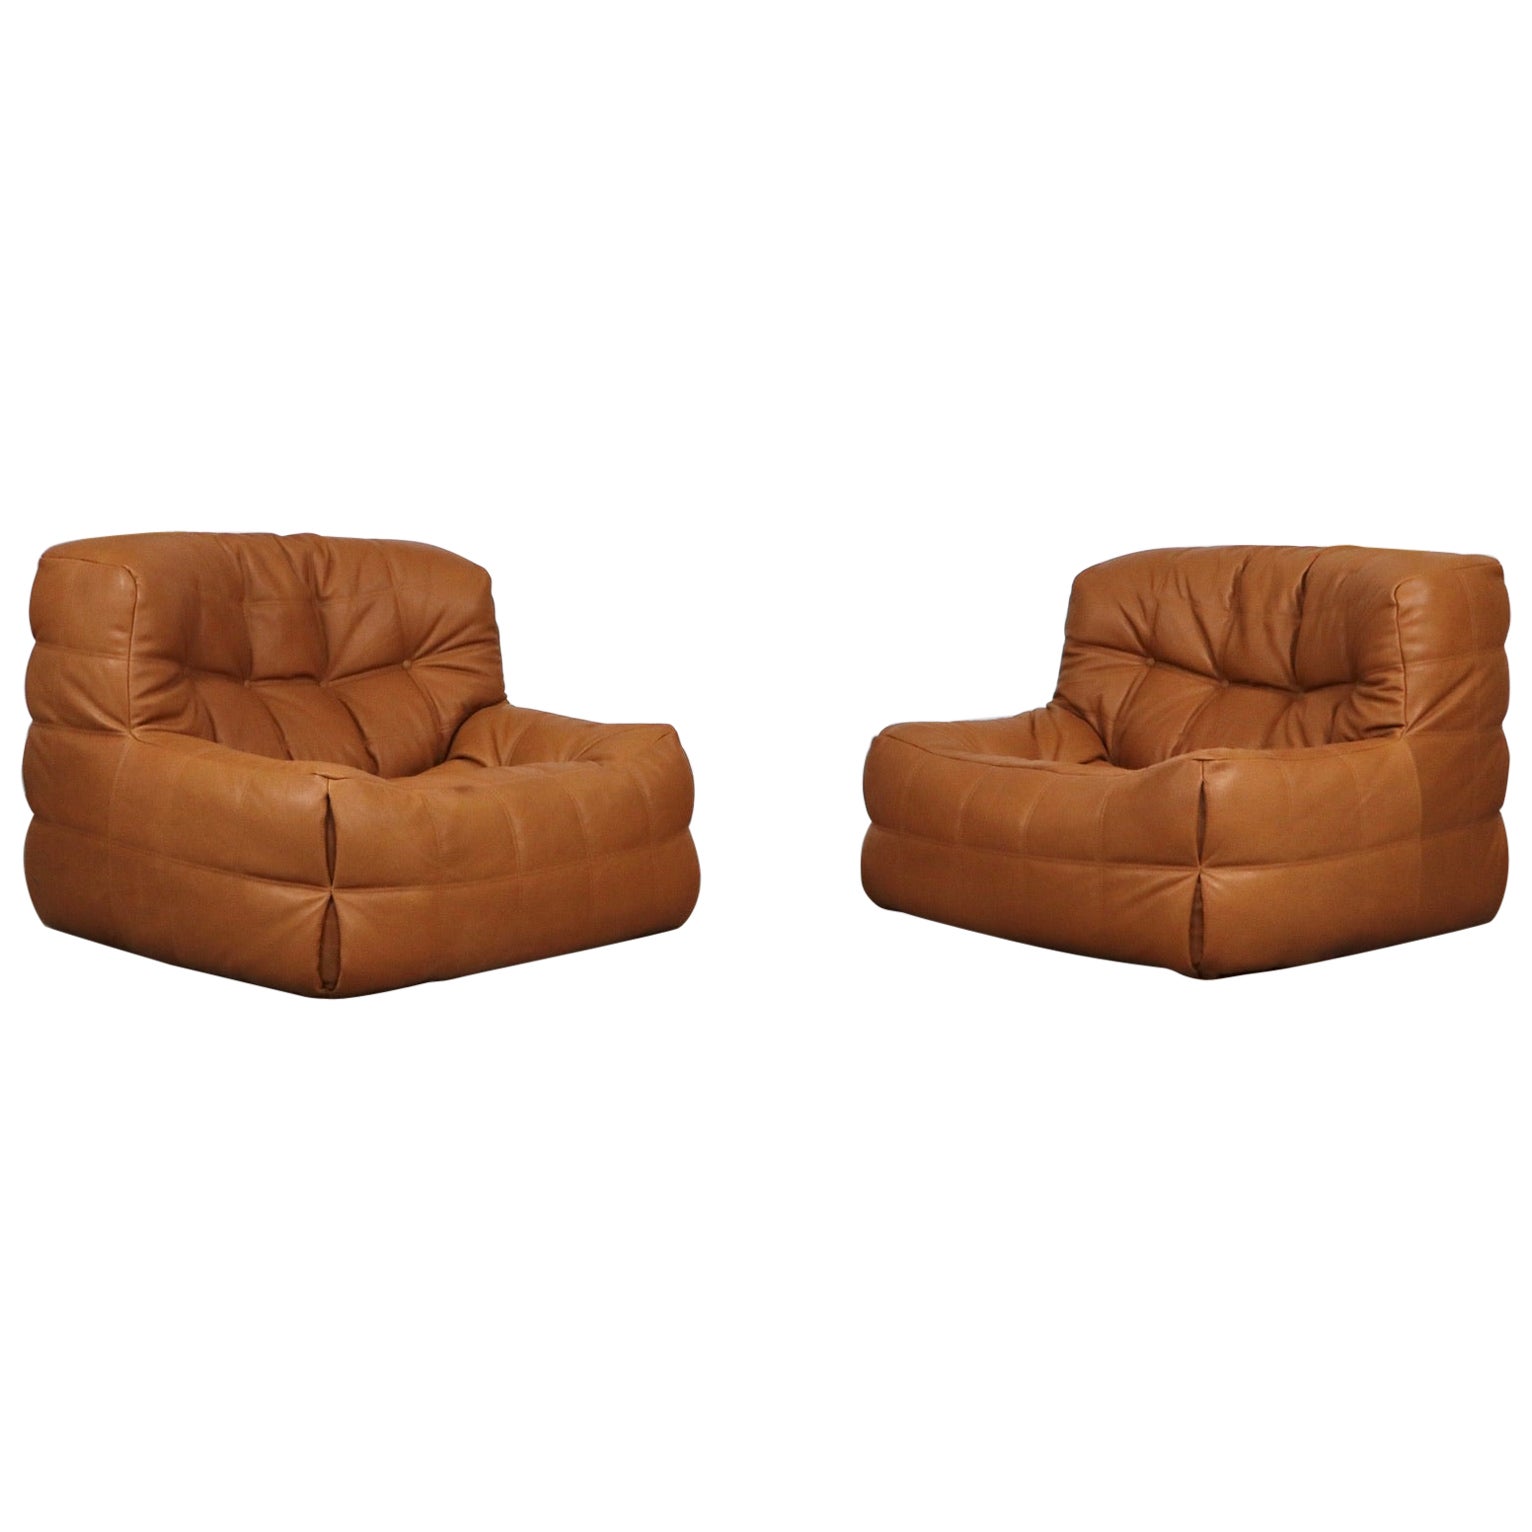 Pair of Ligne Roset Kashima Lounge Chairs in Cognac Leather by Michel Ducaroy